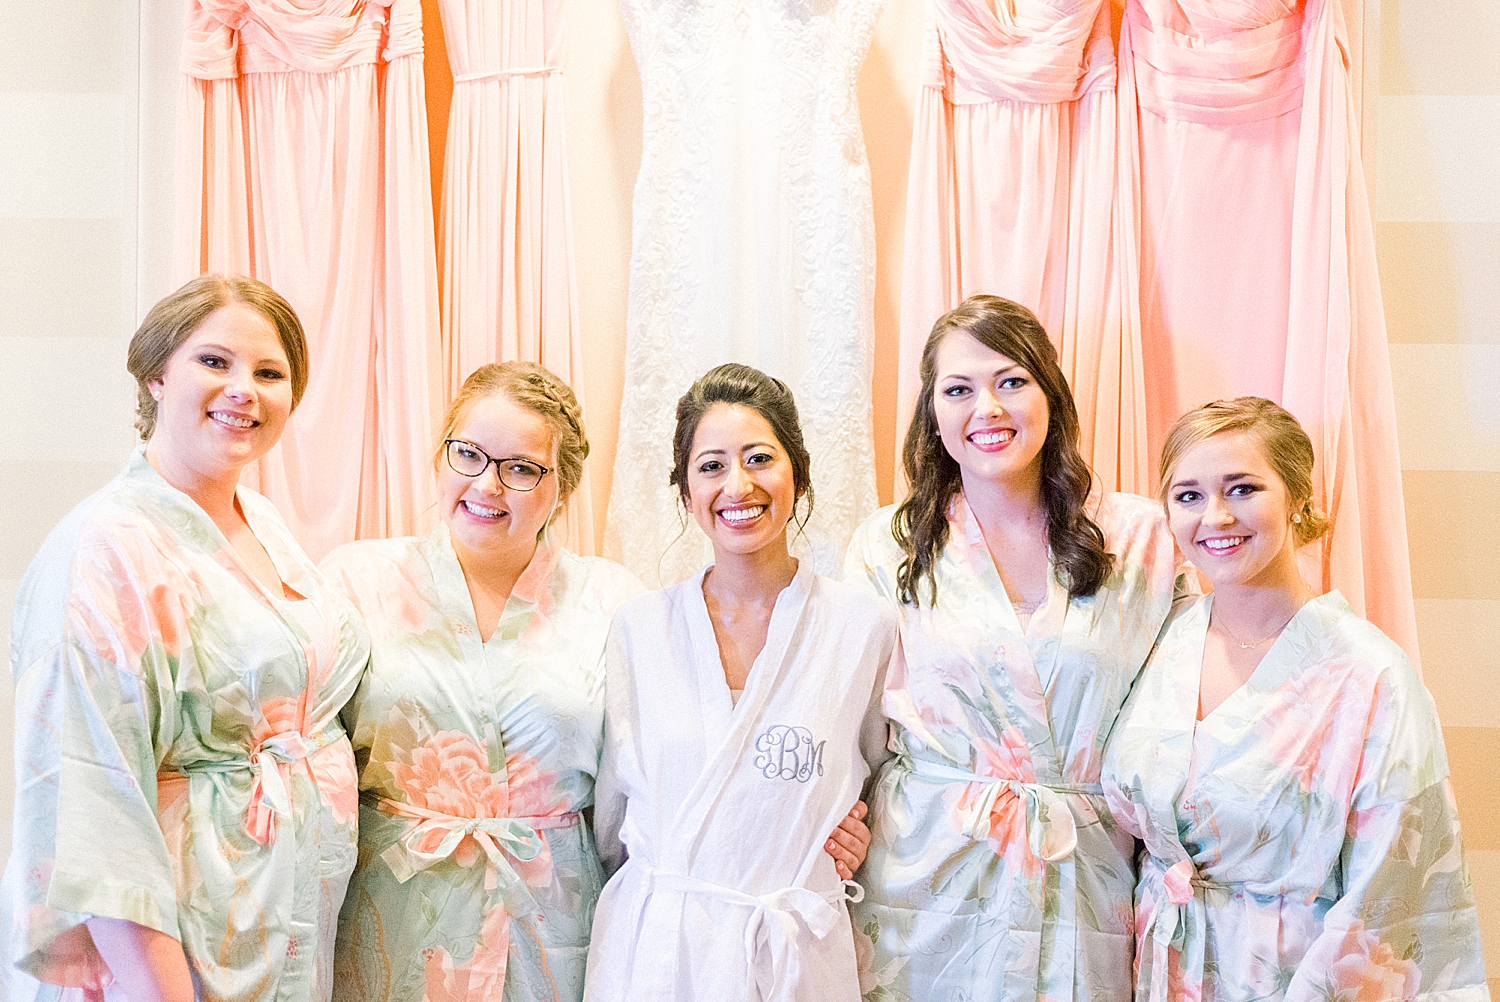 bride and bridesmaids pose together by gowns